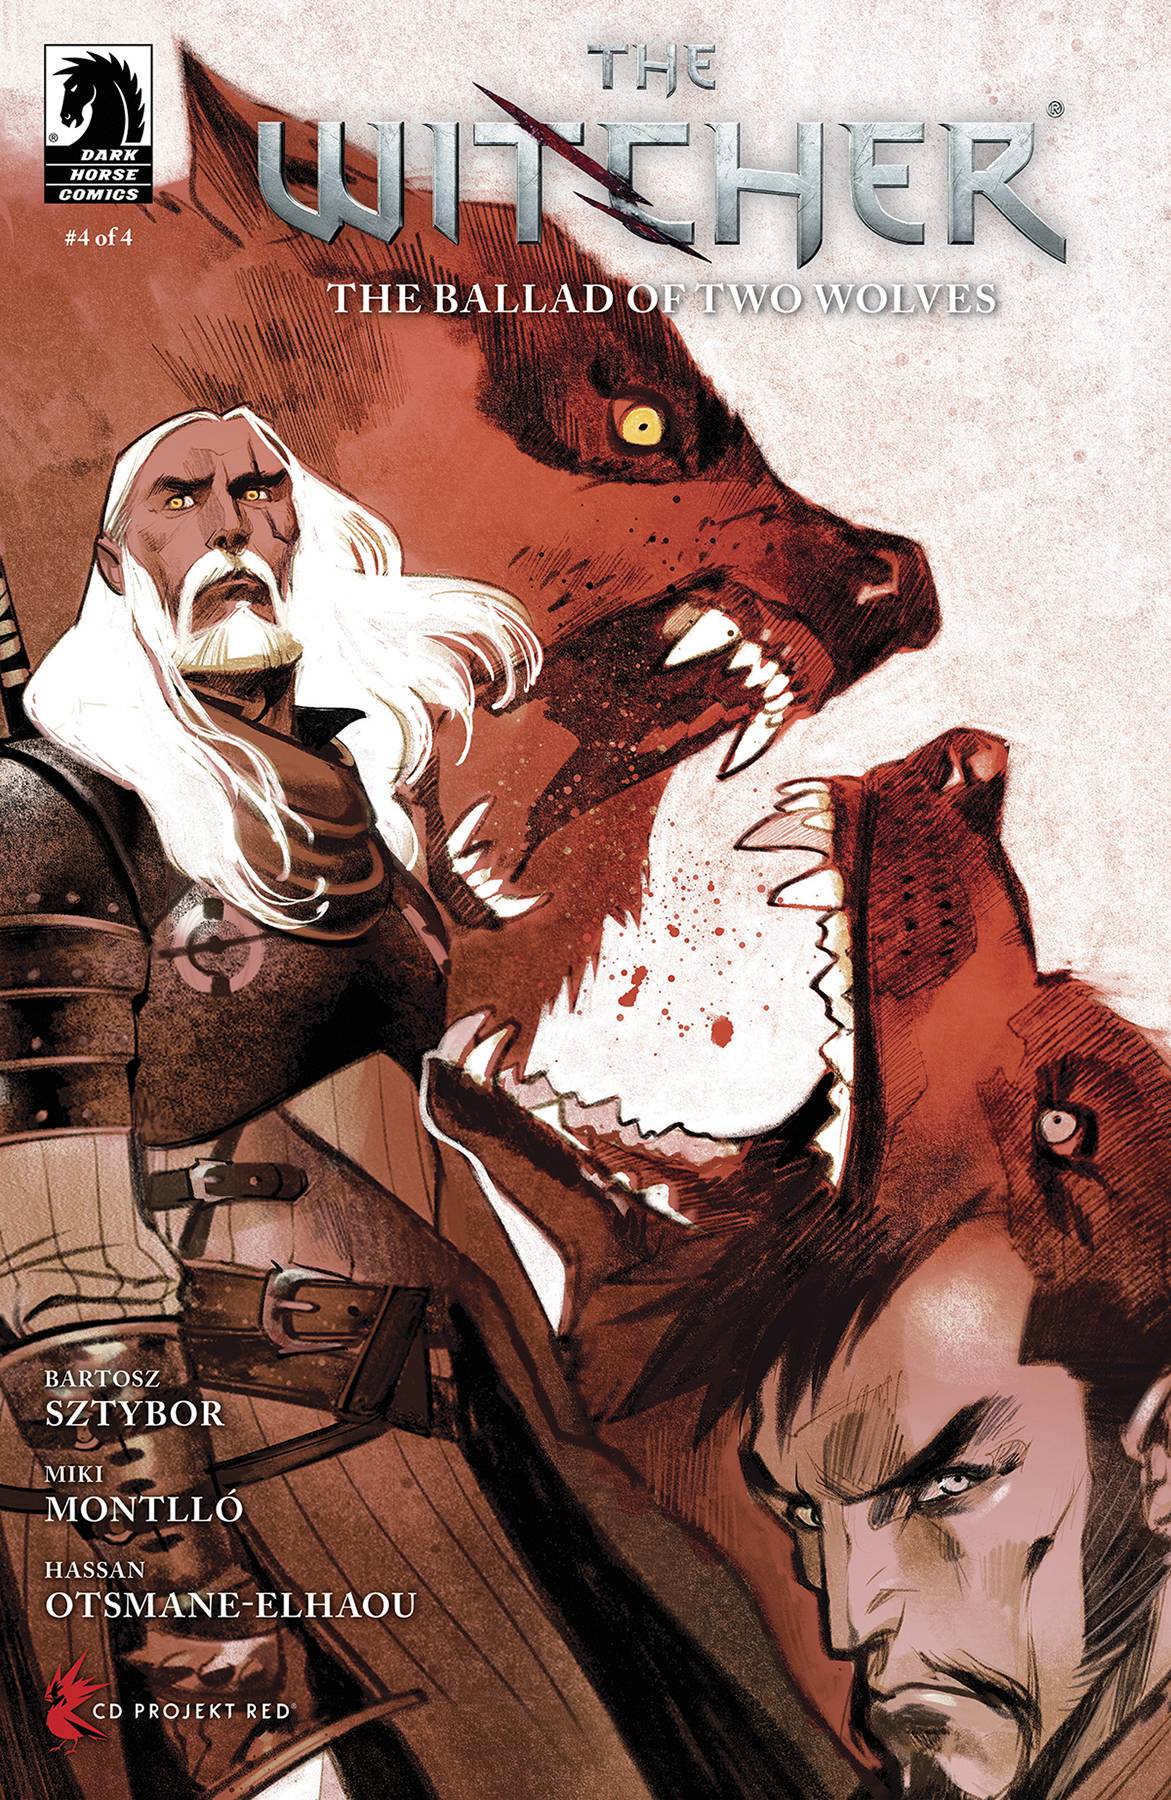 WITCHER THE BALLAD OF TWO WOLVES #4 (OF 4) CVR A MONTLLO - Third Eye